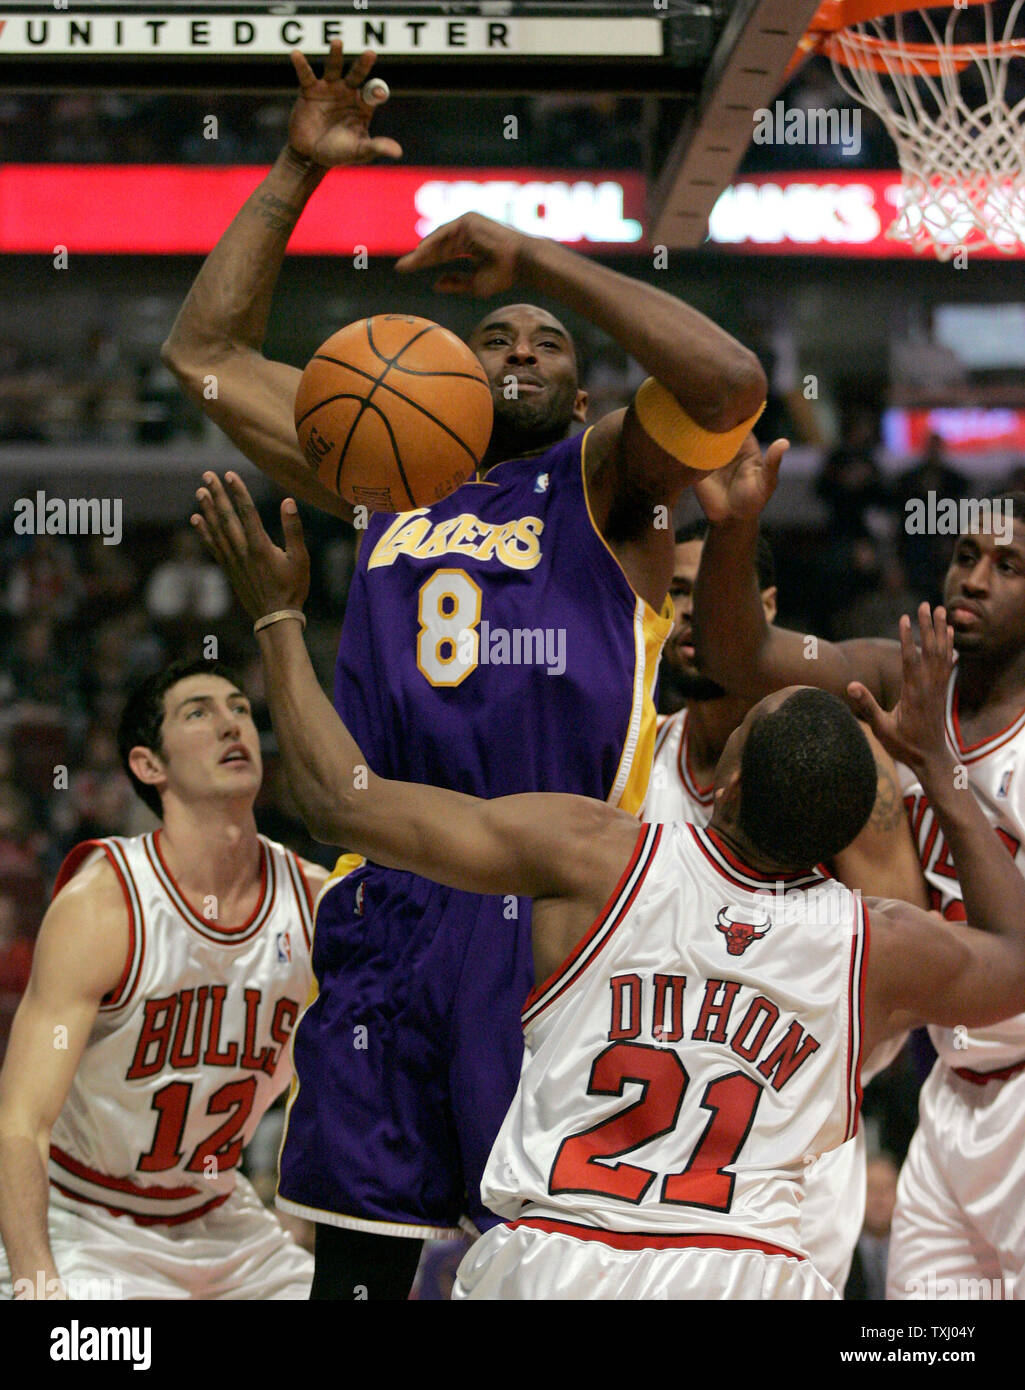 Los Angeles Lakers' Kobe Bryant (8) is fouled by Chicago Bulls' Chris Duhon (21) as he tries to go up for a shot past Duhon, Kirk Hinrich (12) and Michael Sweetney, right, during the first quarter on December 9, 2005, in Chicago. (UPI Photo/Brian Kersey) Stock Photo